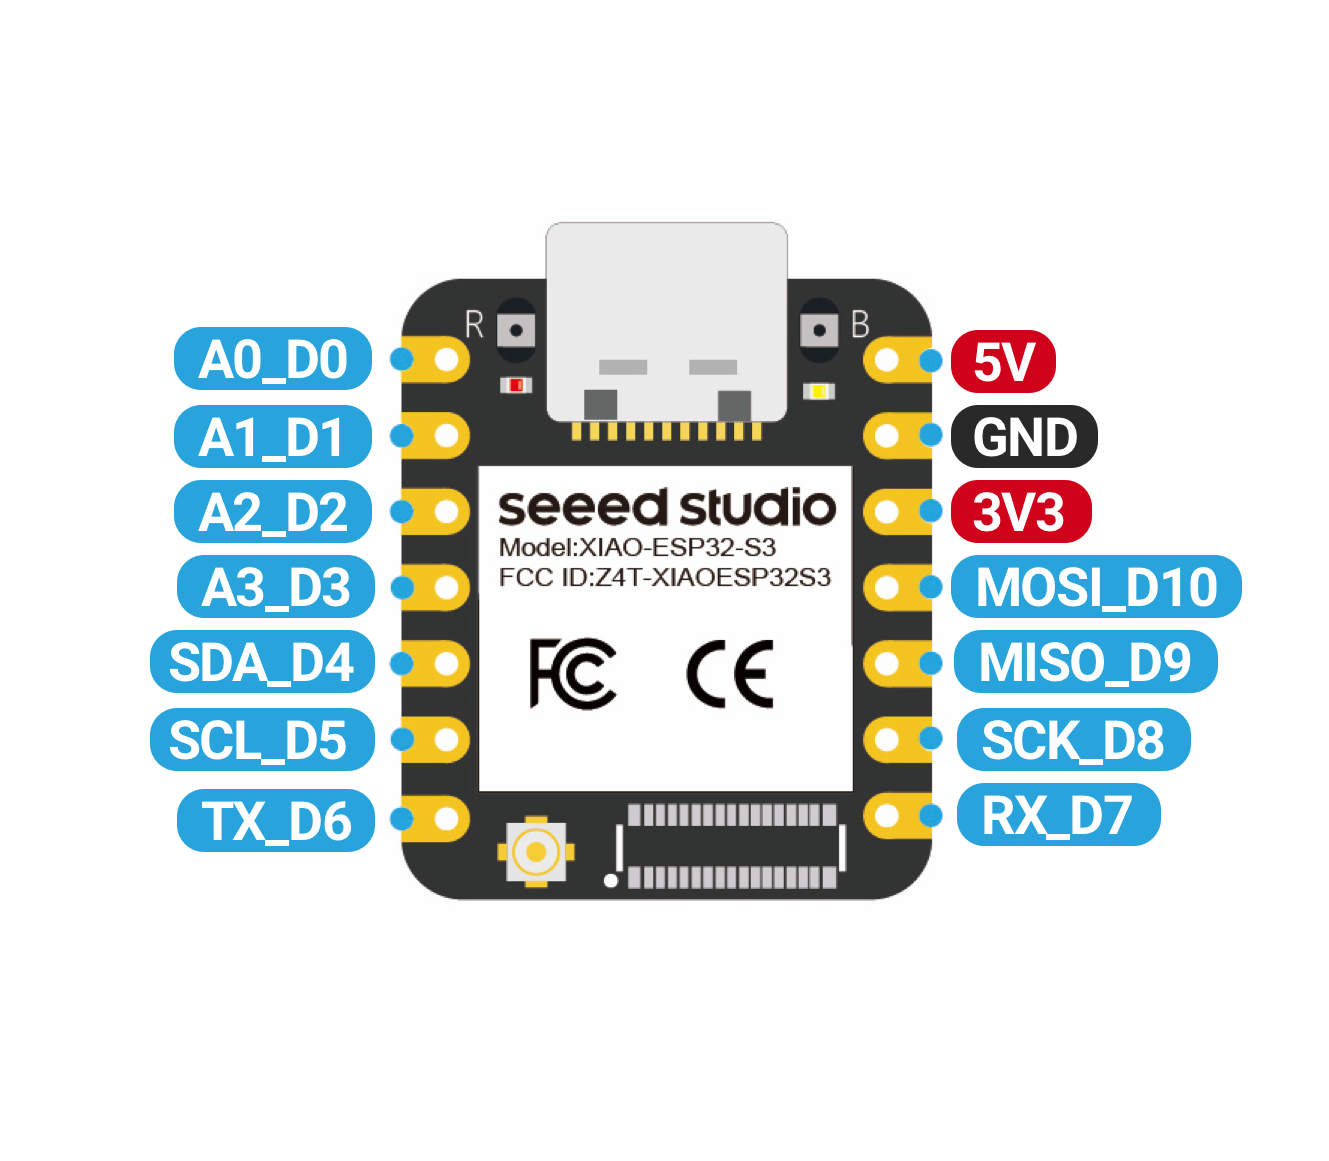 Seeed Studio XIAO ESP32C3 pinout reference